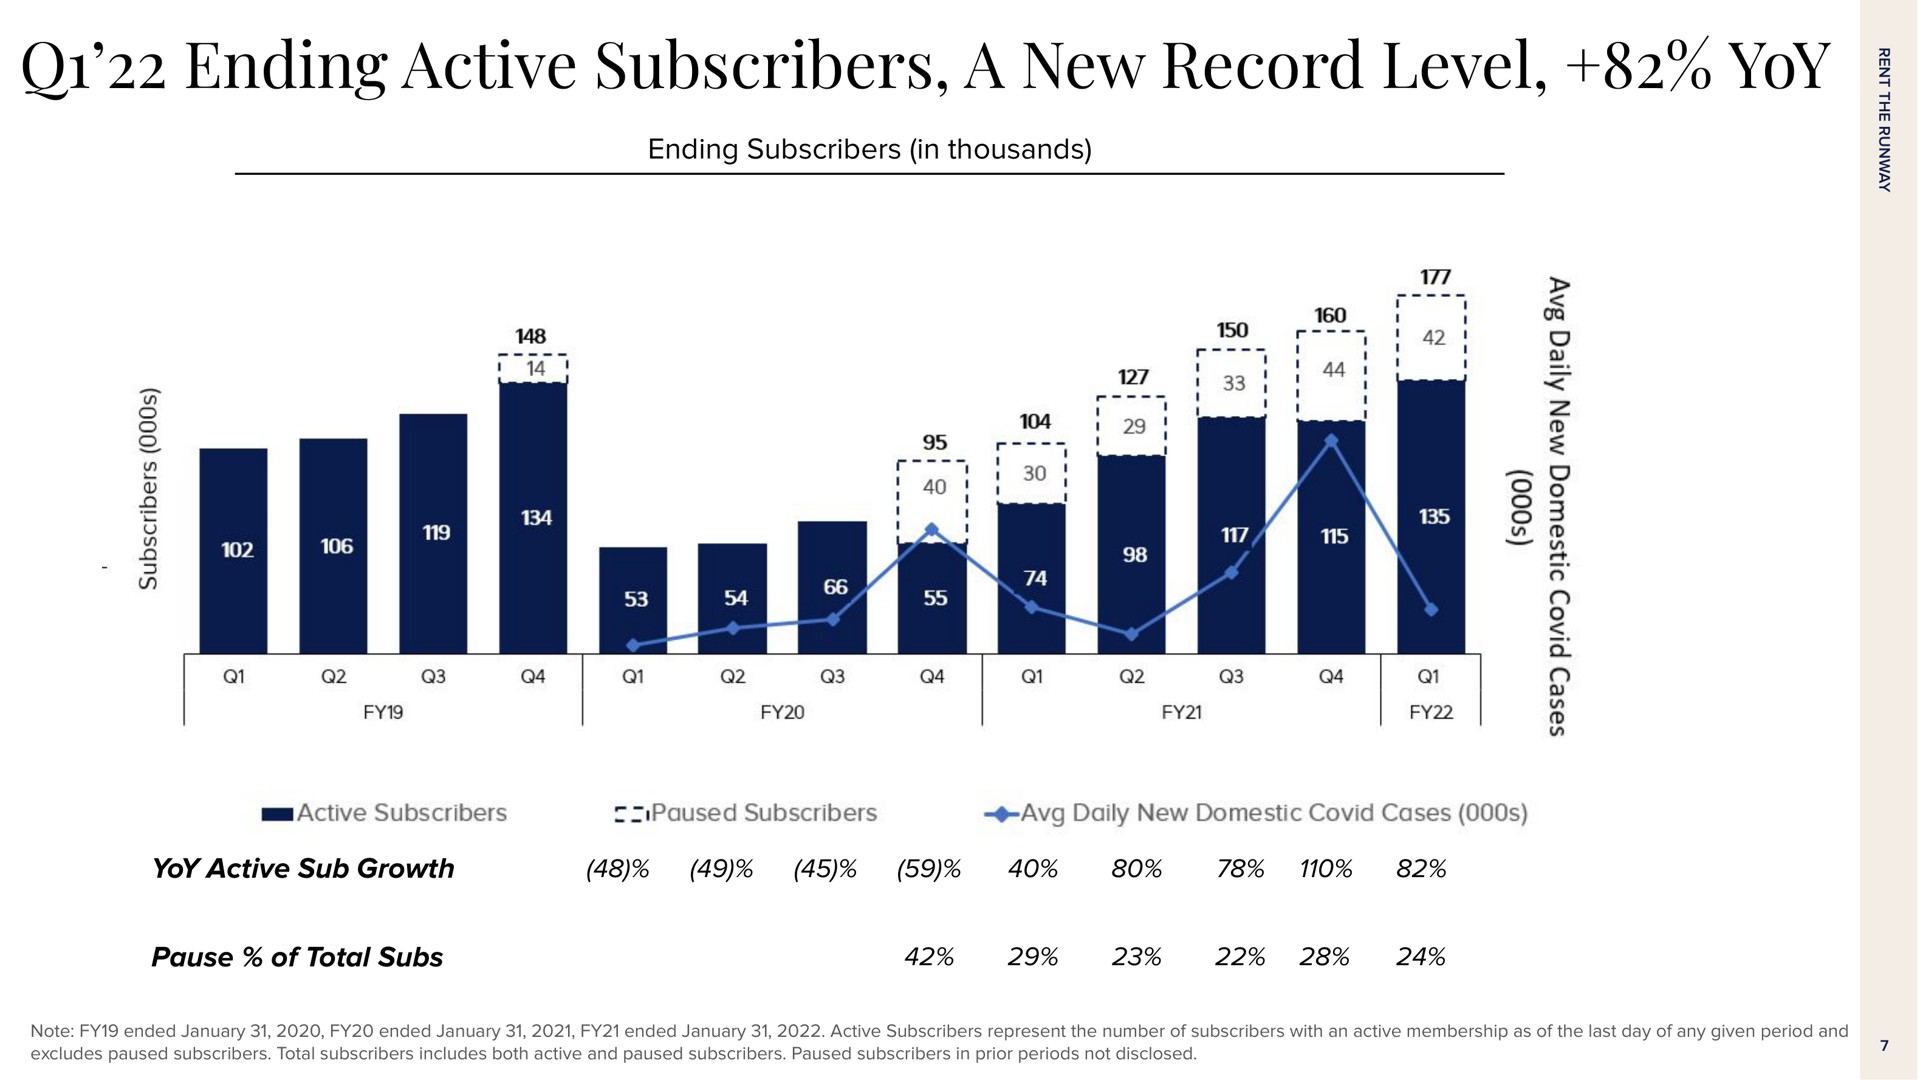 ending active subscribers a new record level yoy ending subscribers in thousands yoy active sub growth pause of total subs | Rent The Runway